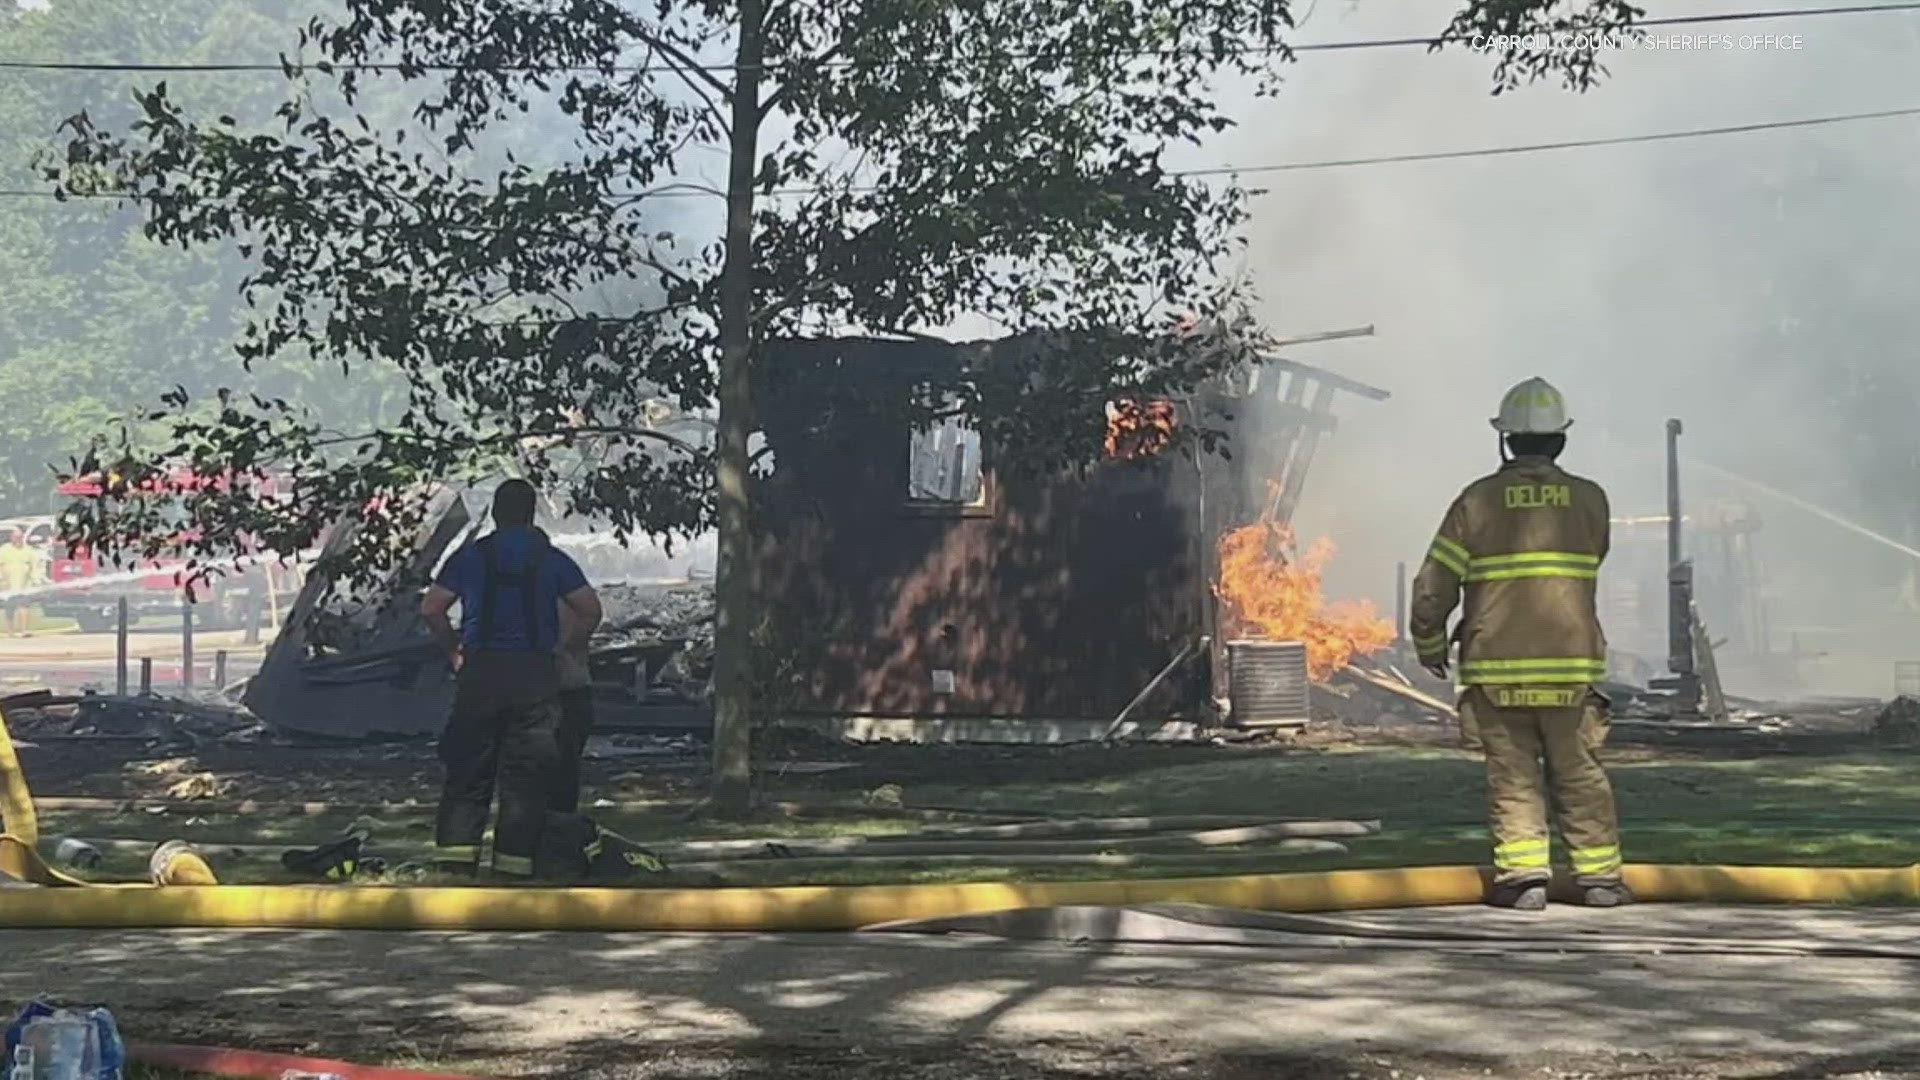 The fire was reported around 3:45 p.m. Tuesday in the 1200 block of Smith Avenue, near West North Washington and North 9th streets.